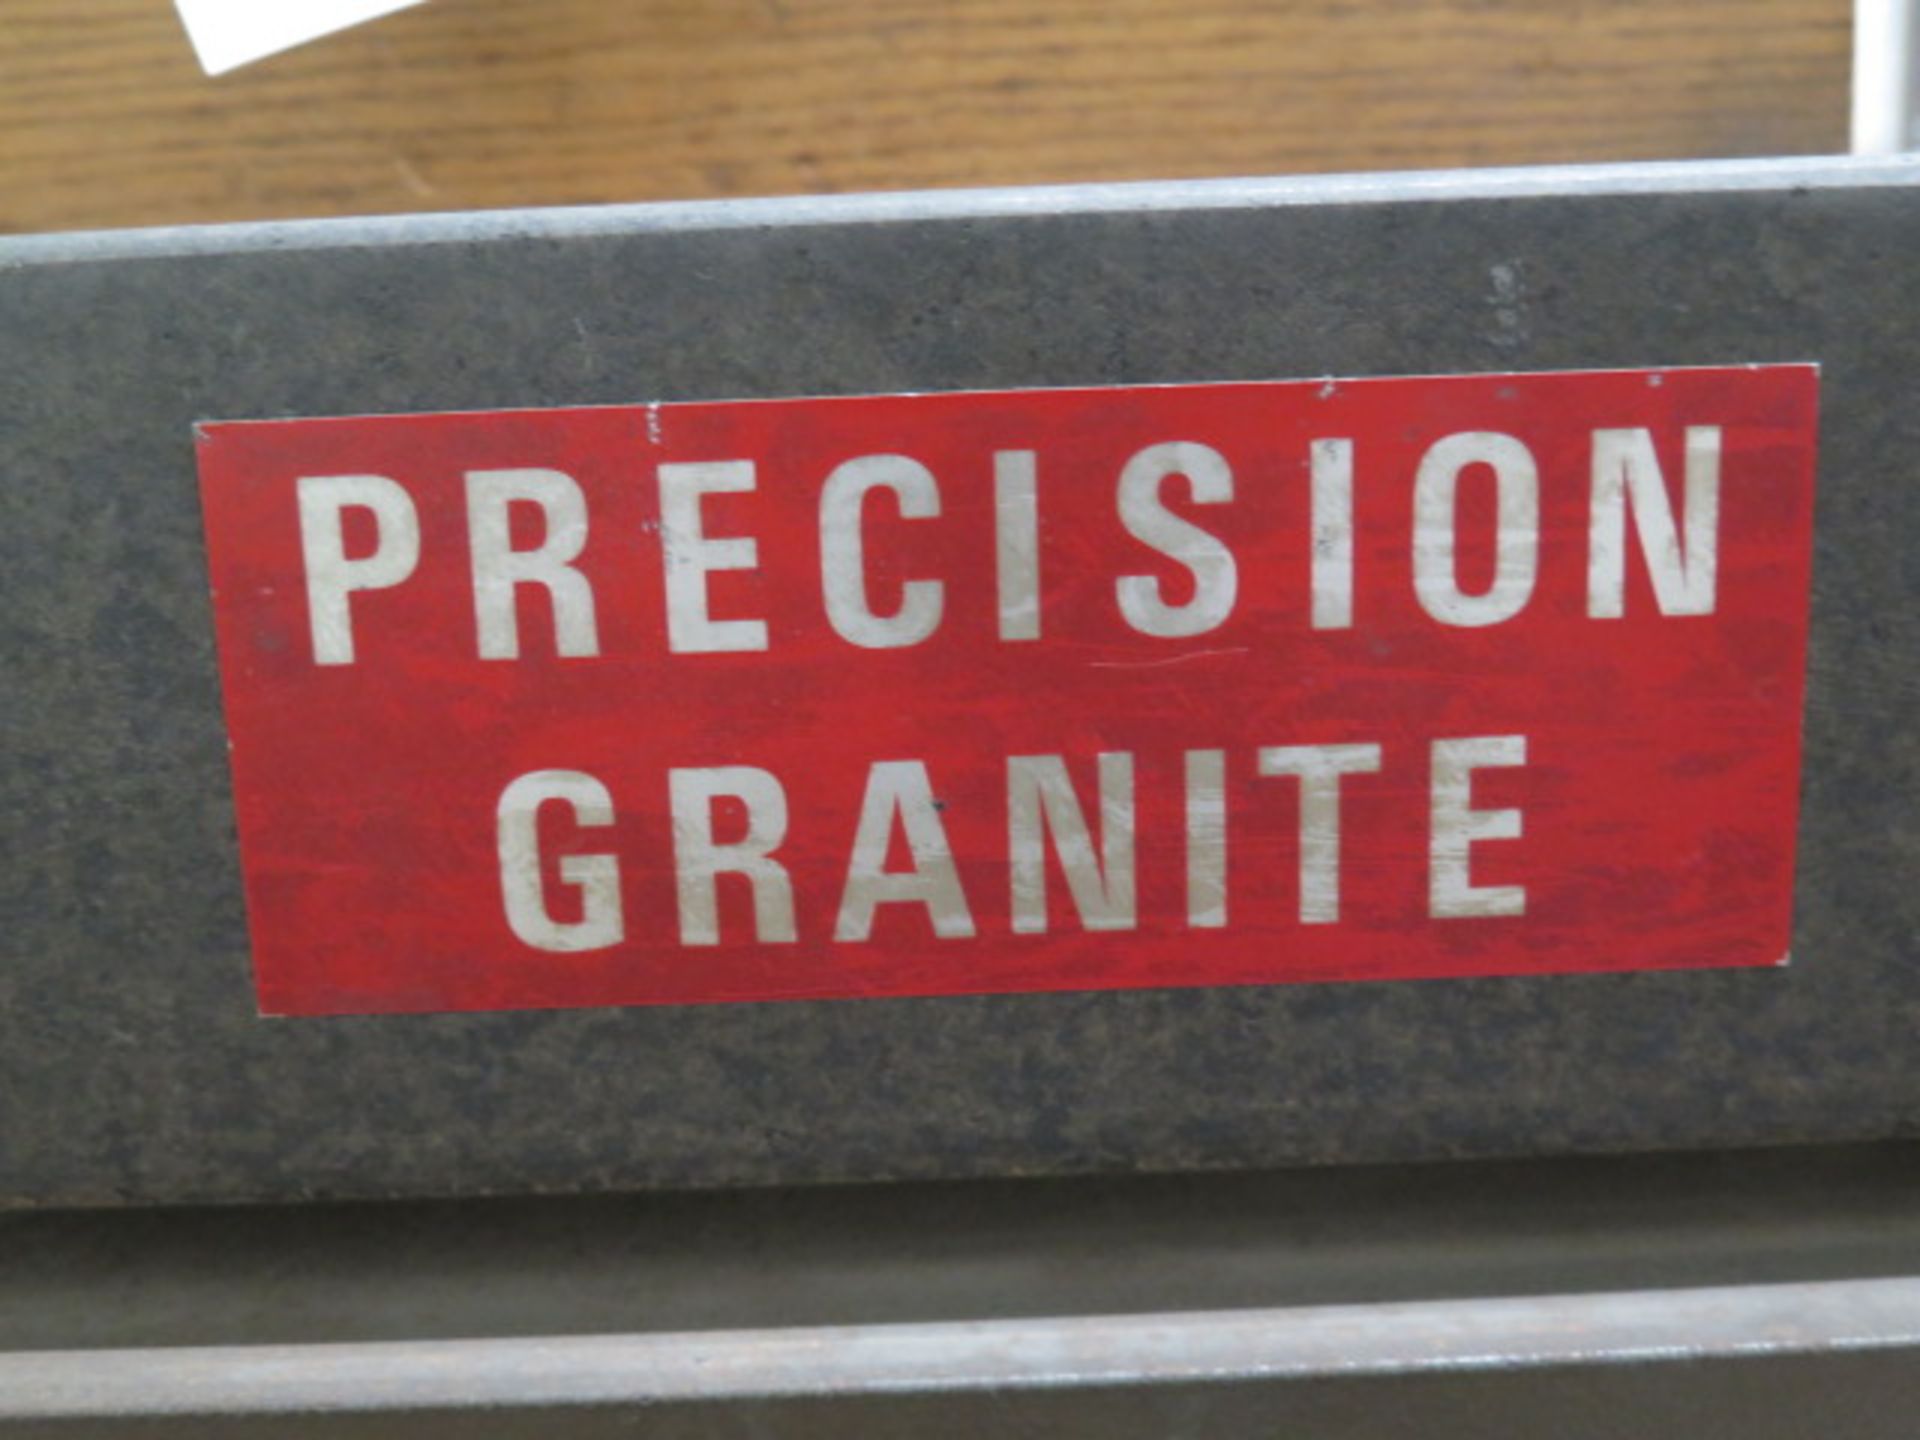 24” x 36” x 4 ½’ Granite Surface Plate w/ Roll Stand - Image 3 of 3